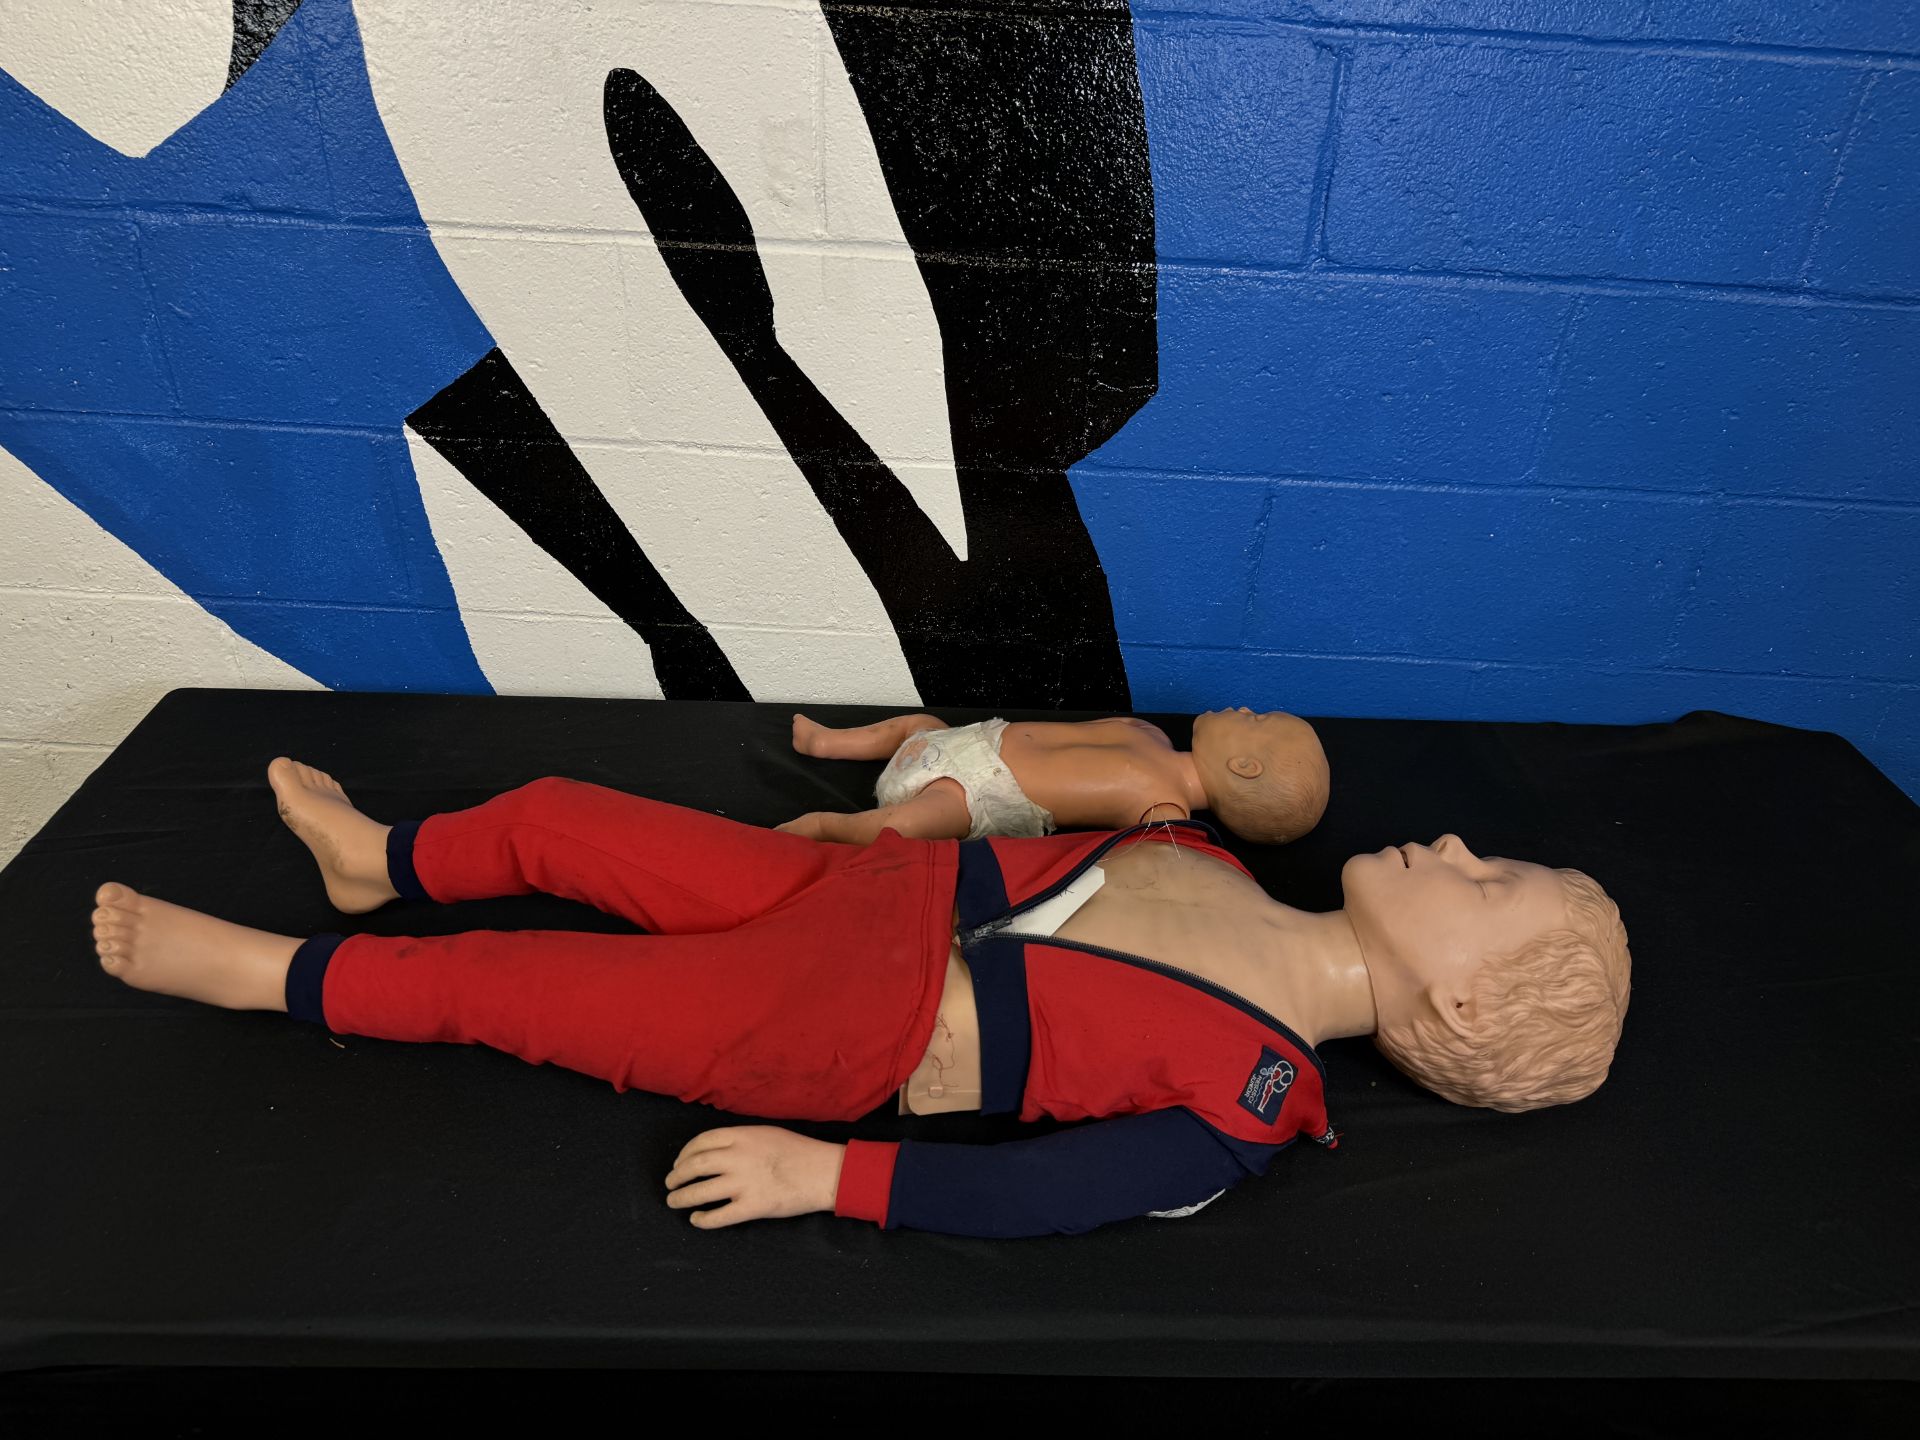 Pediatric and Infant CPR Crisis Dummy w/ Case - Image 2 of 3